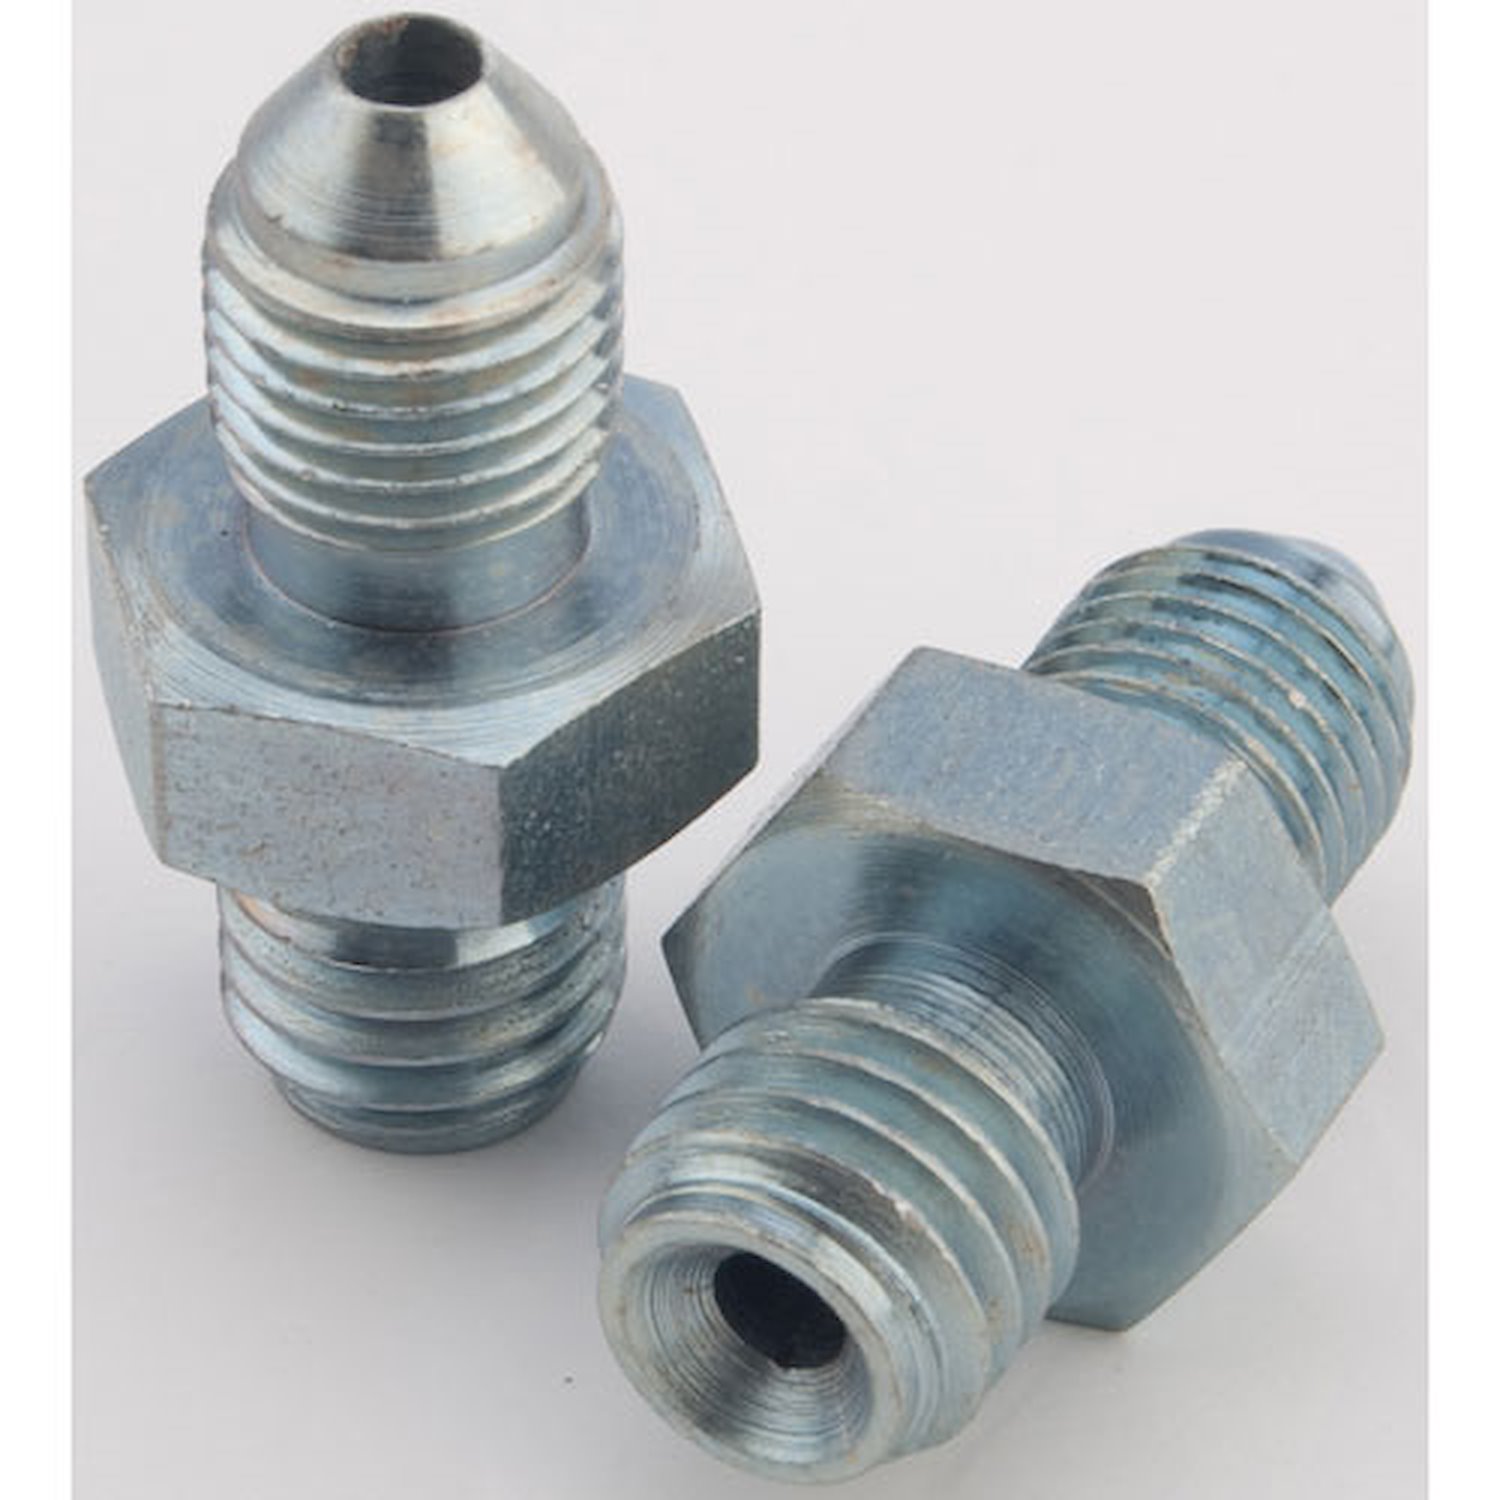 AN to Inverted Flare Male Brake Adapter Fittings [-3 AN x 10 mm x 1.5 Male Inverted Flare]